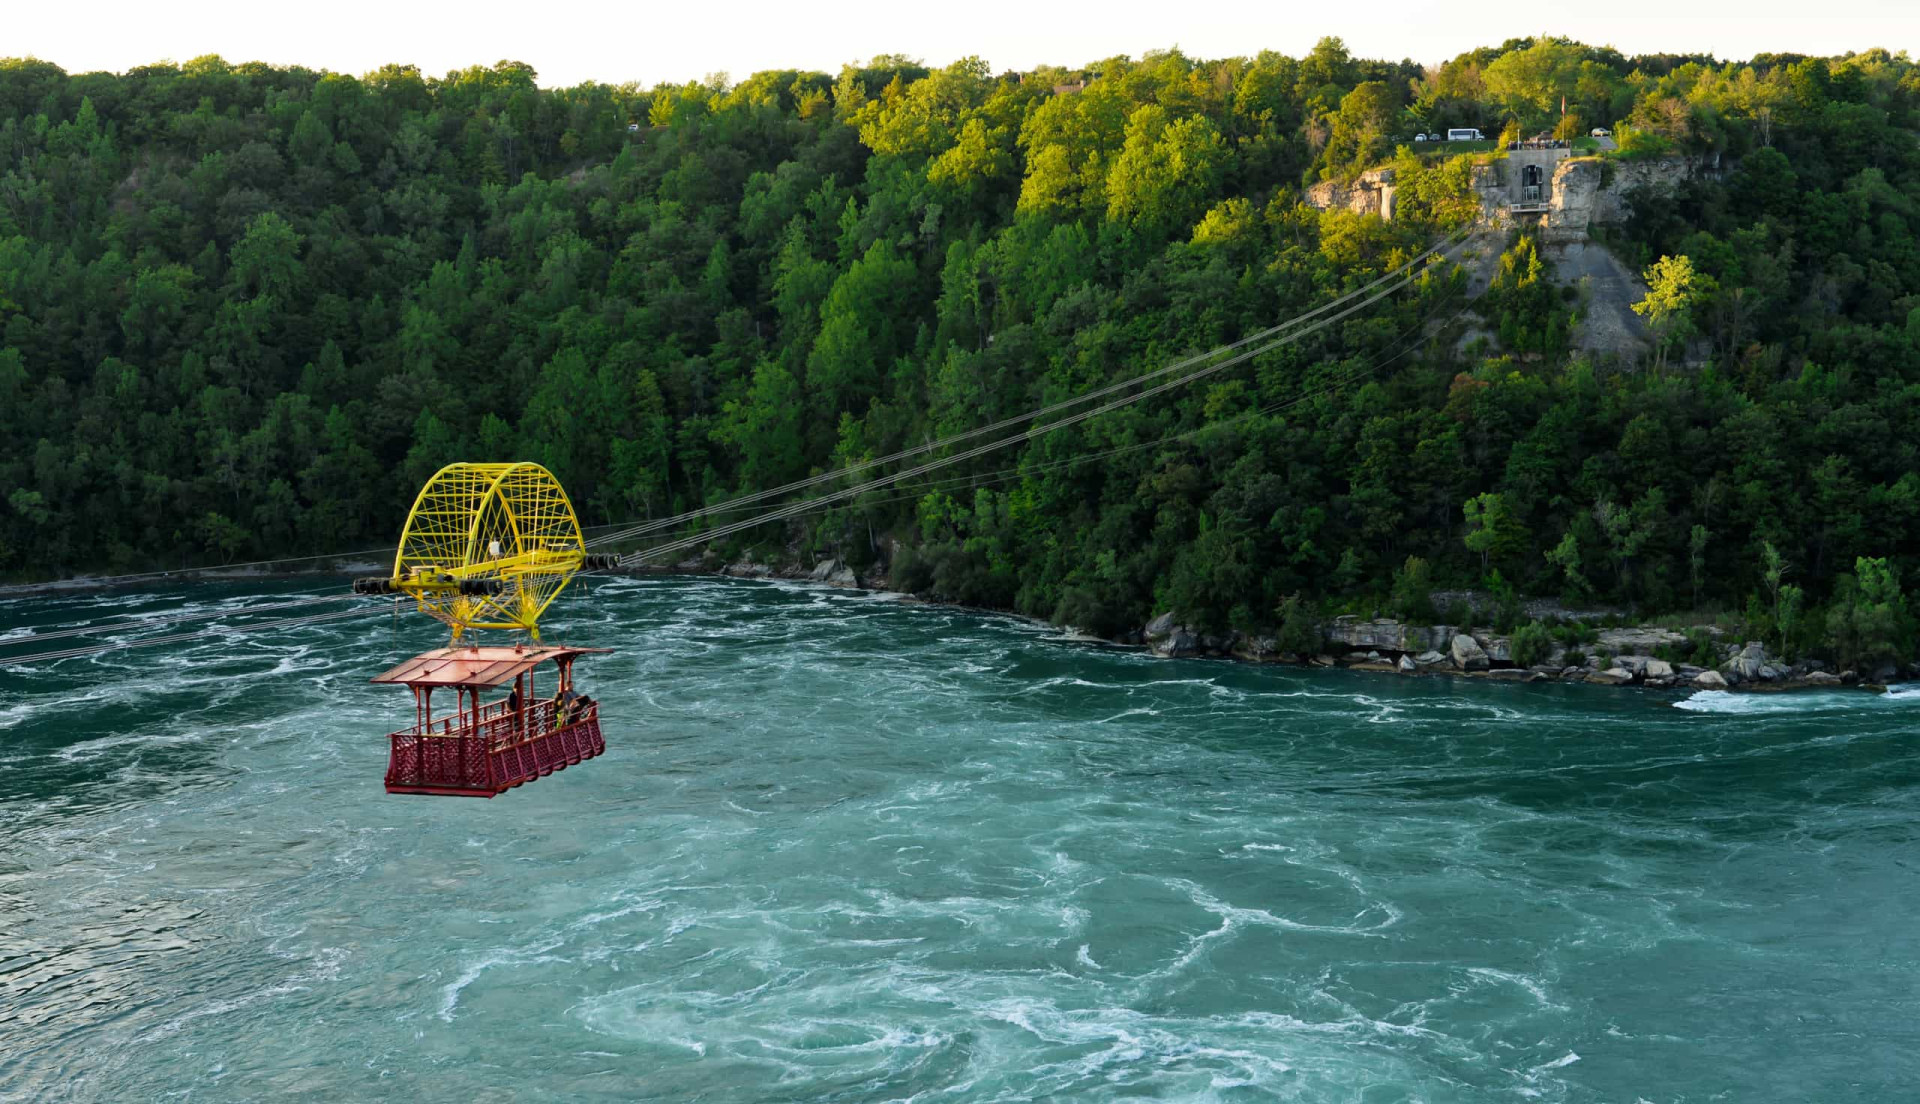 <p>After viewing the mighty falls, taking a ride on Niagara Falls Whirlpool Aero Car is the next best thing to do at this world-famous natural landmark.</p><p><a href="https://www.msn.com/en-us/community/channel/vid-7xx8mnucu55yw63we9va2gwr7uihbxwc68fxqp25x6tg4ftibpra?cvid=94631541bc0f4f89bfd59158d696ad7e">Follow us and access great exclusive content every day</a></p>